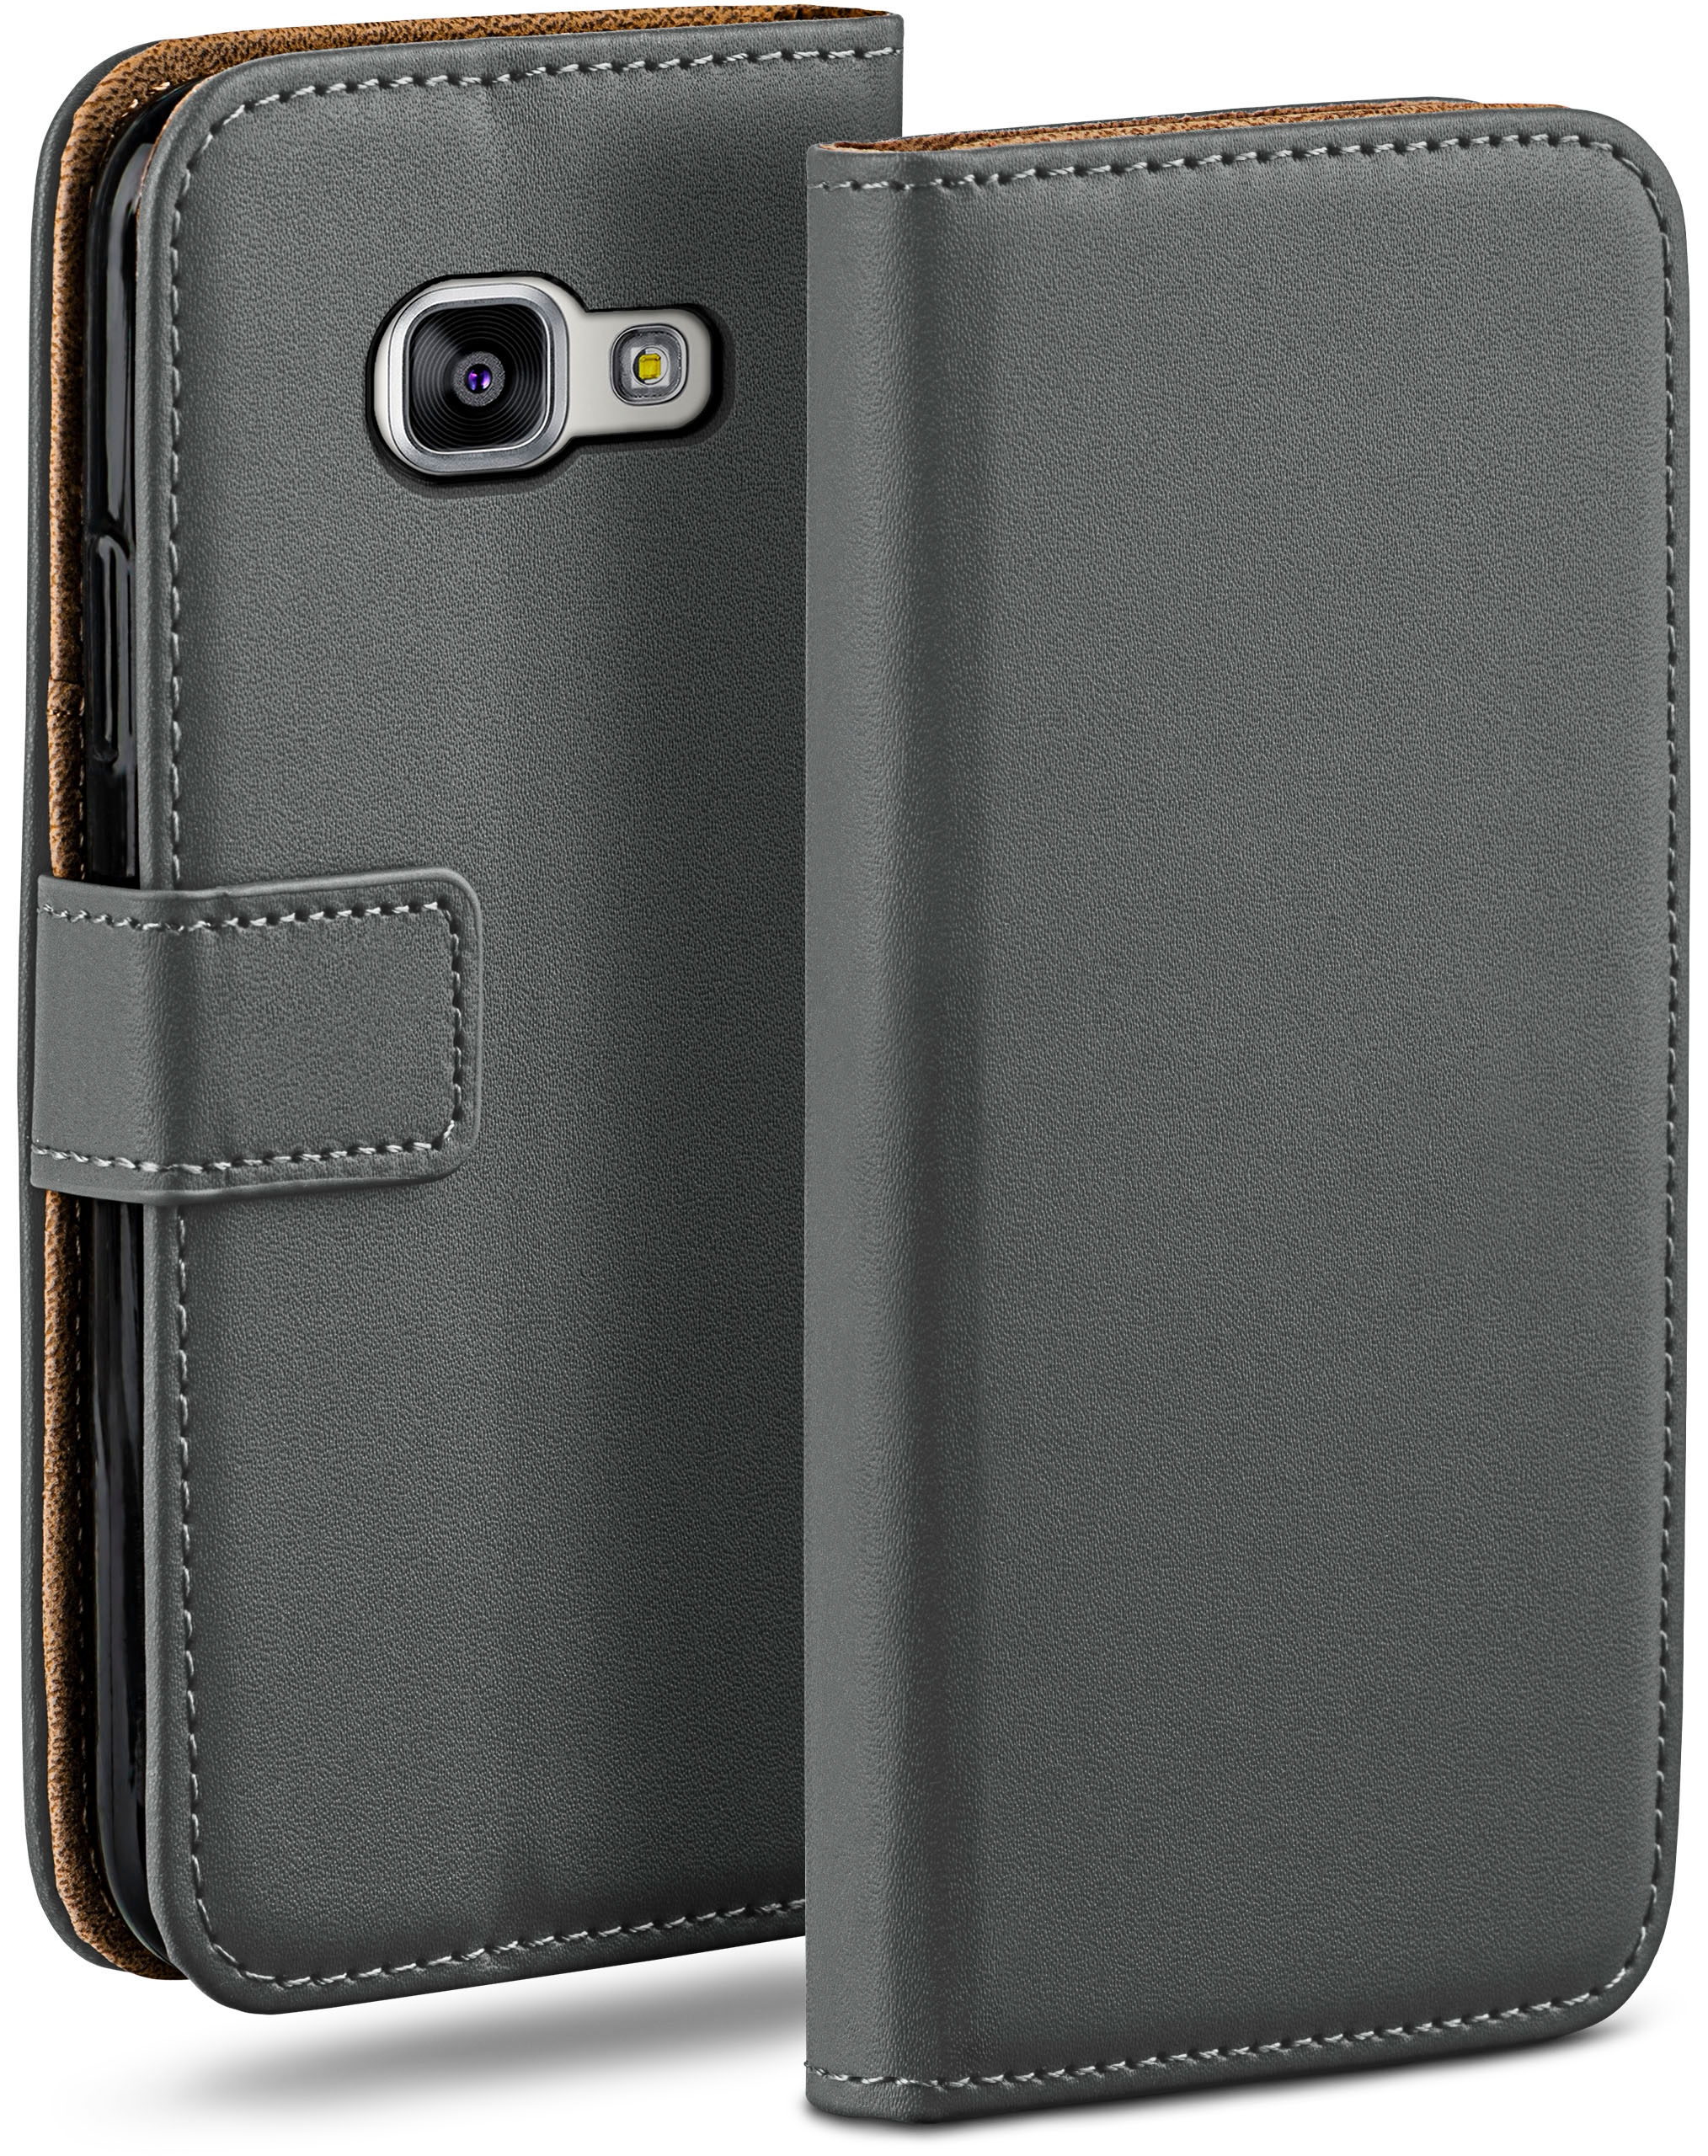 Book (2016), Samsung, Anthracite-Gray Case, Bookcover, MOEX A3 Galaxy